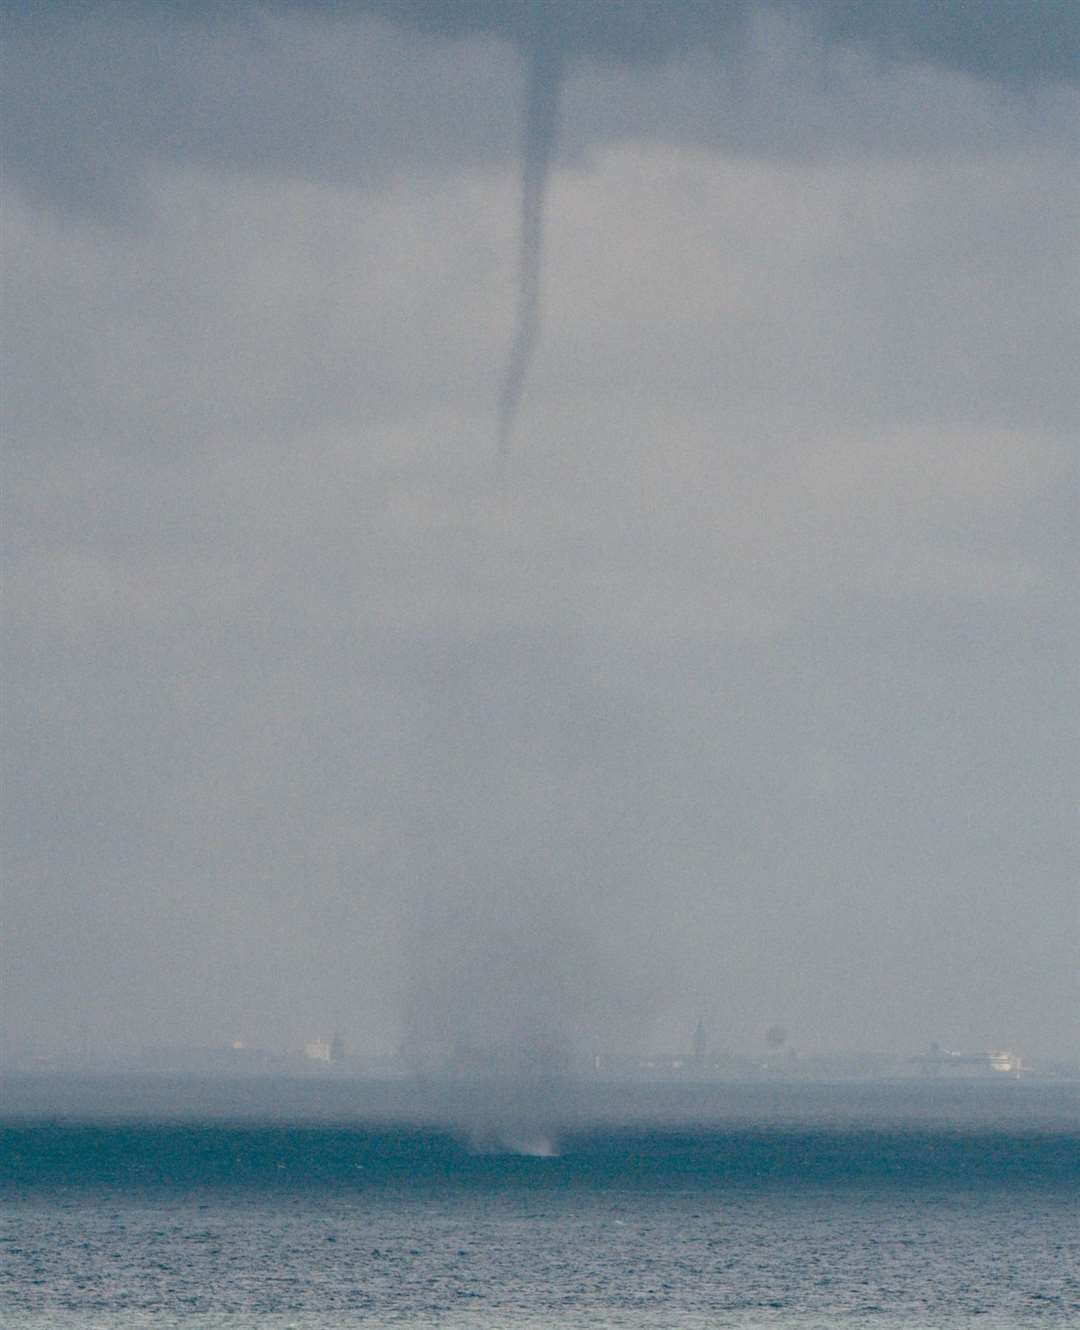 A water spout could be seen touching down in the English Channel off St Margeret's Bay ahead of Storm Ciaran. Picture: Paul Jolliffe, Dover Straight Shipping – FotoFlite